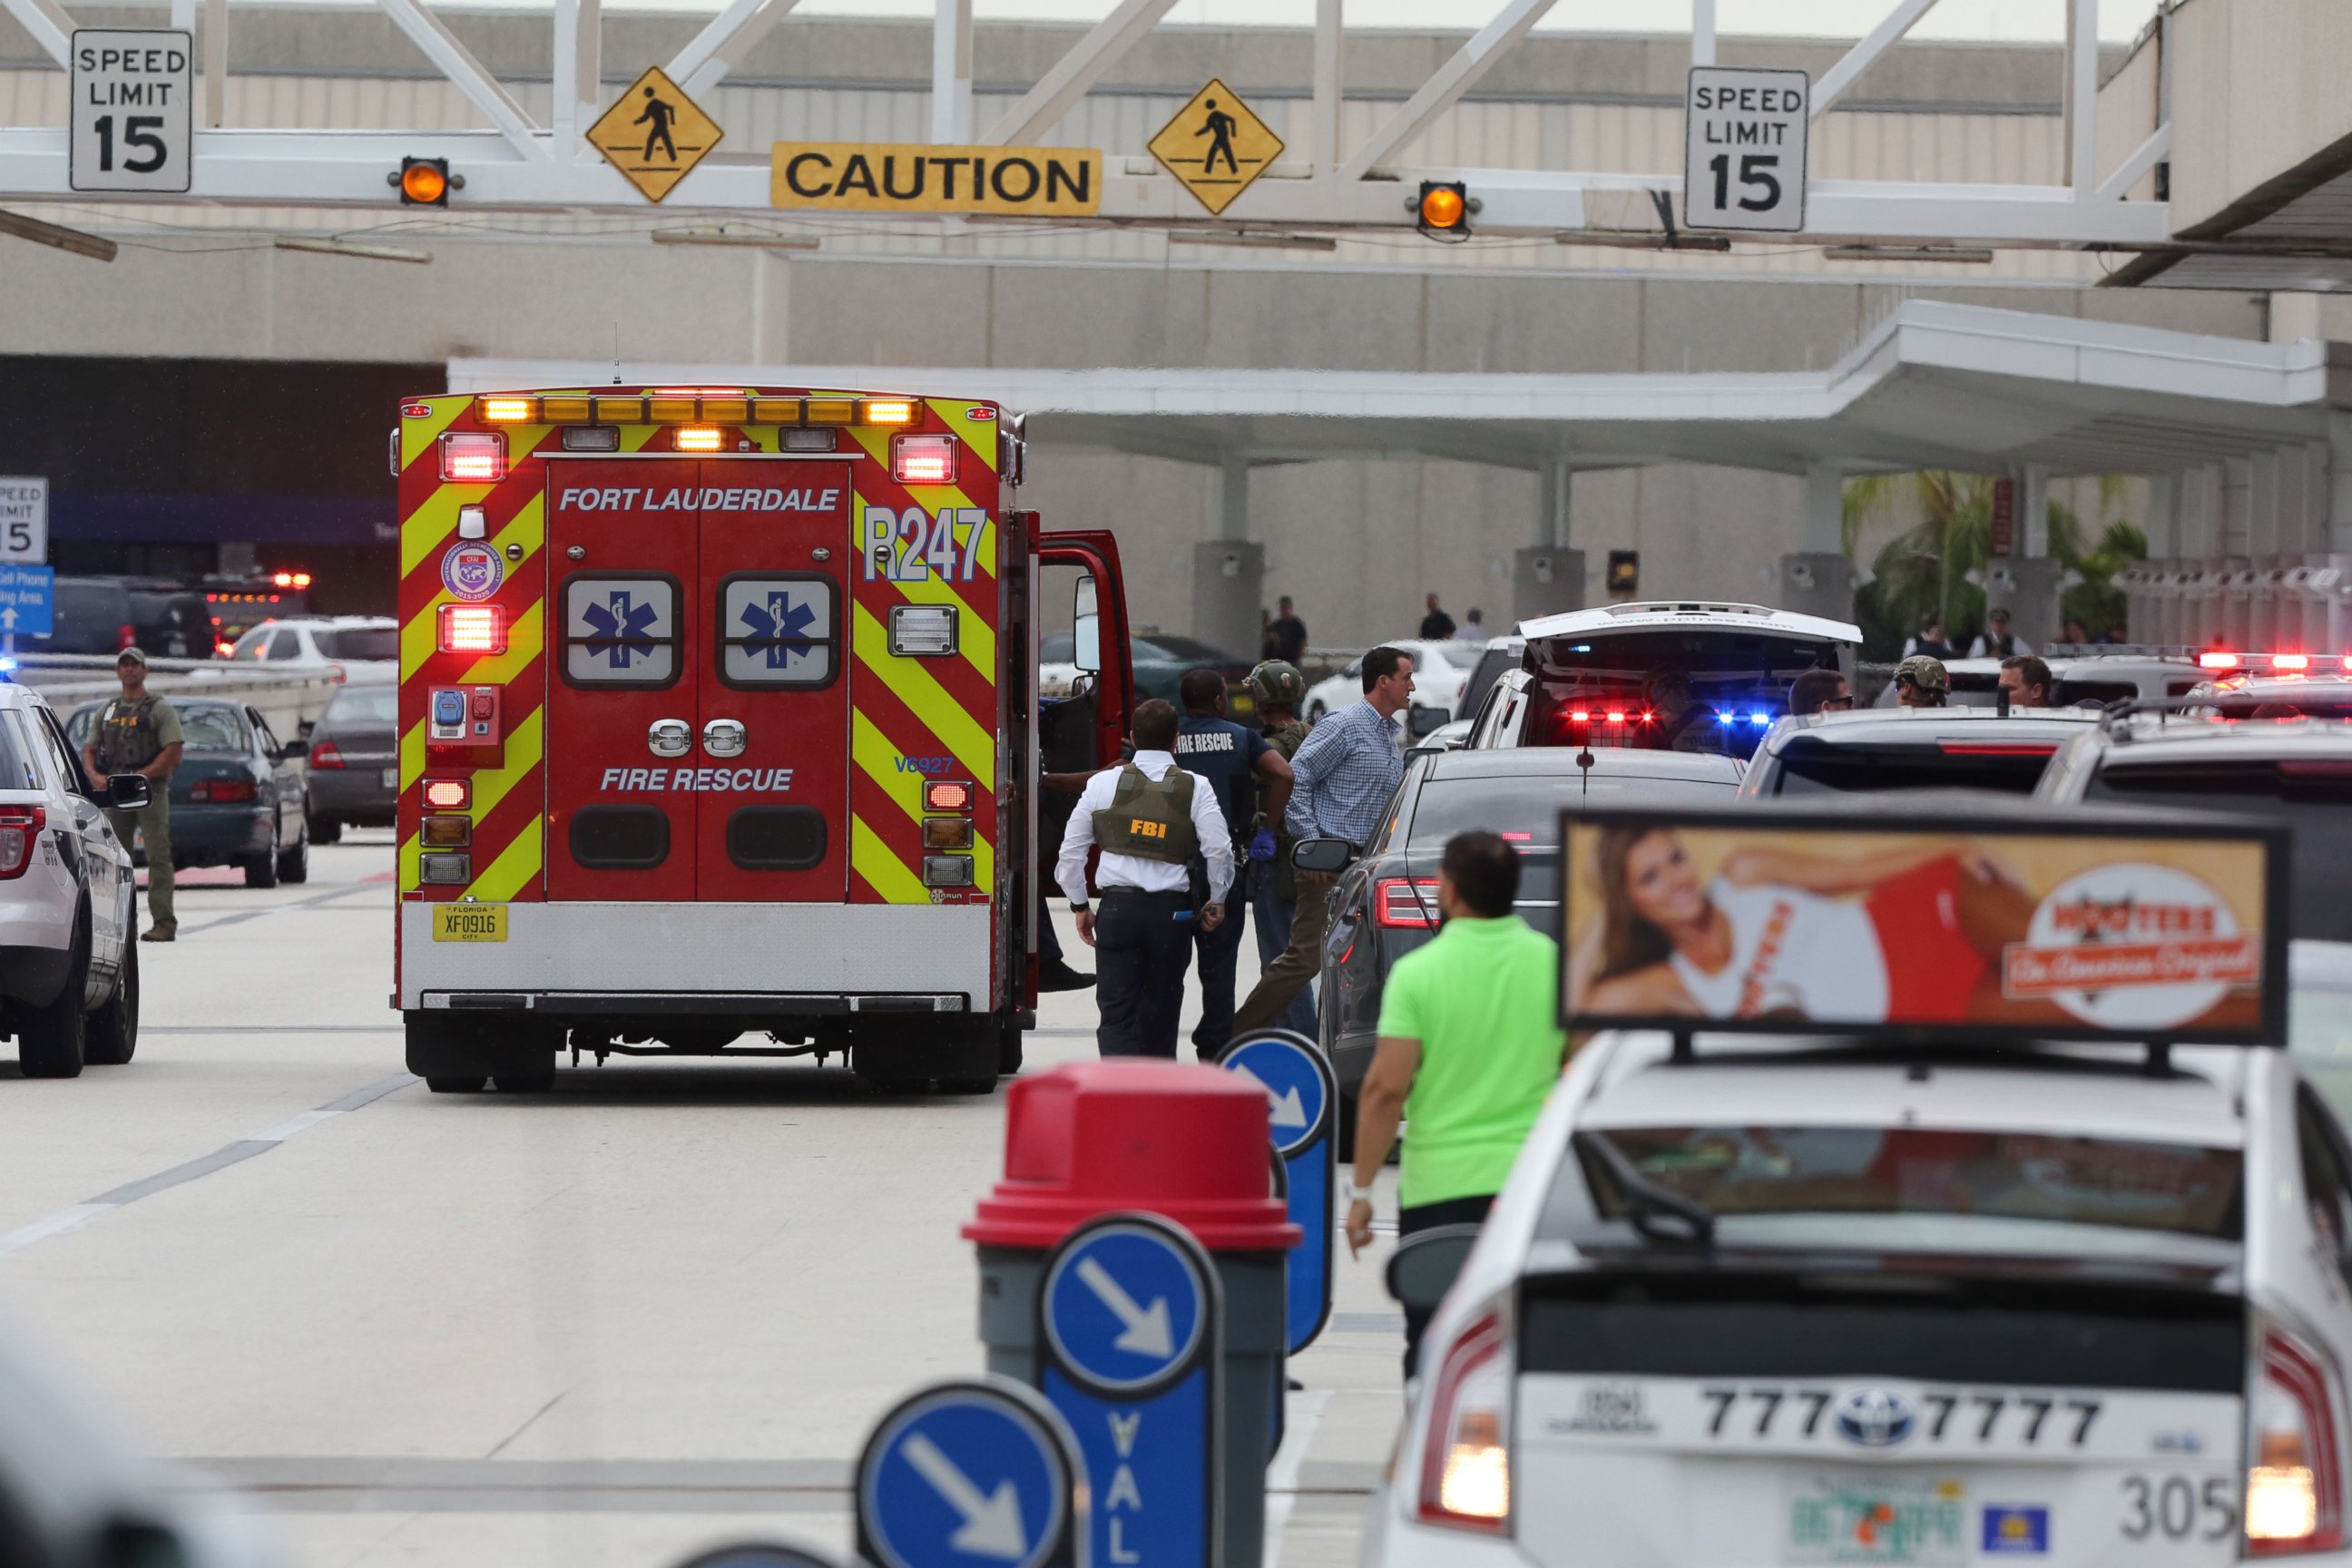 PHOTO: Fire rescue and emergency vehicles at the Fort Lauderdale Airport, on Jan. 6, 2017, in Fort Lauderdale, Florida.